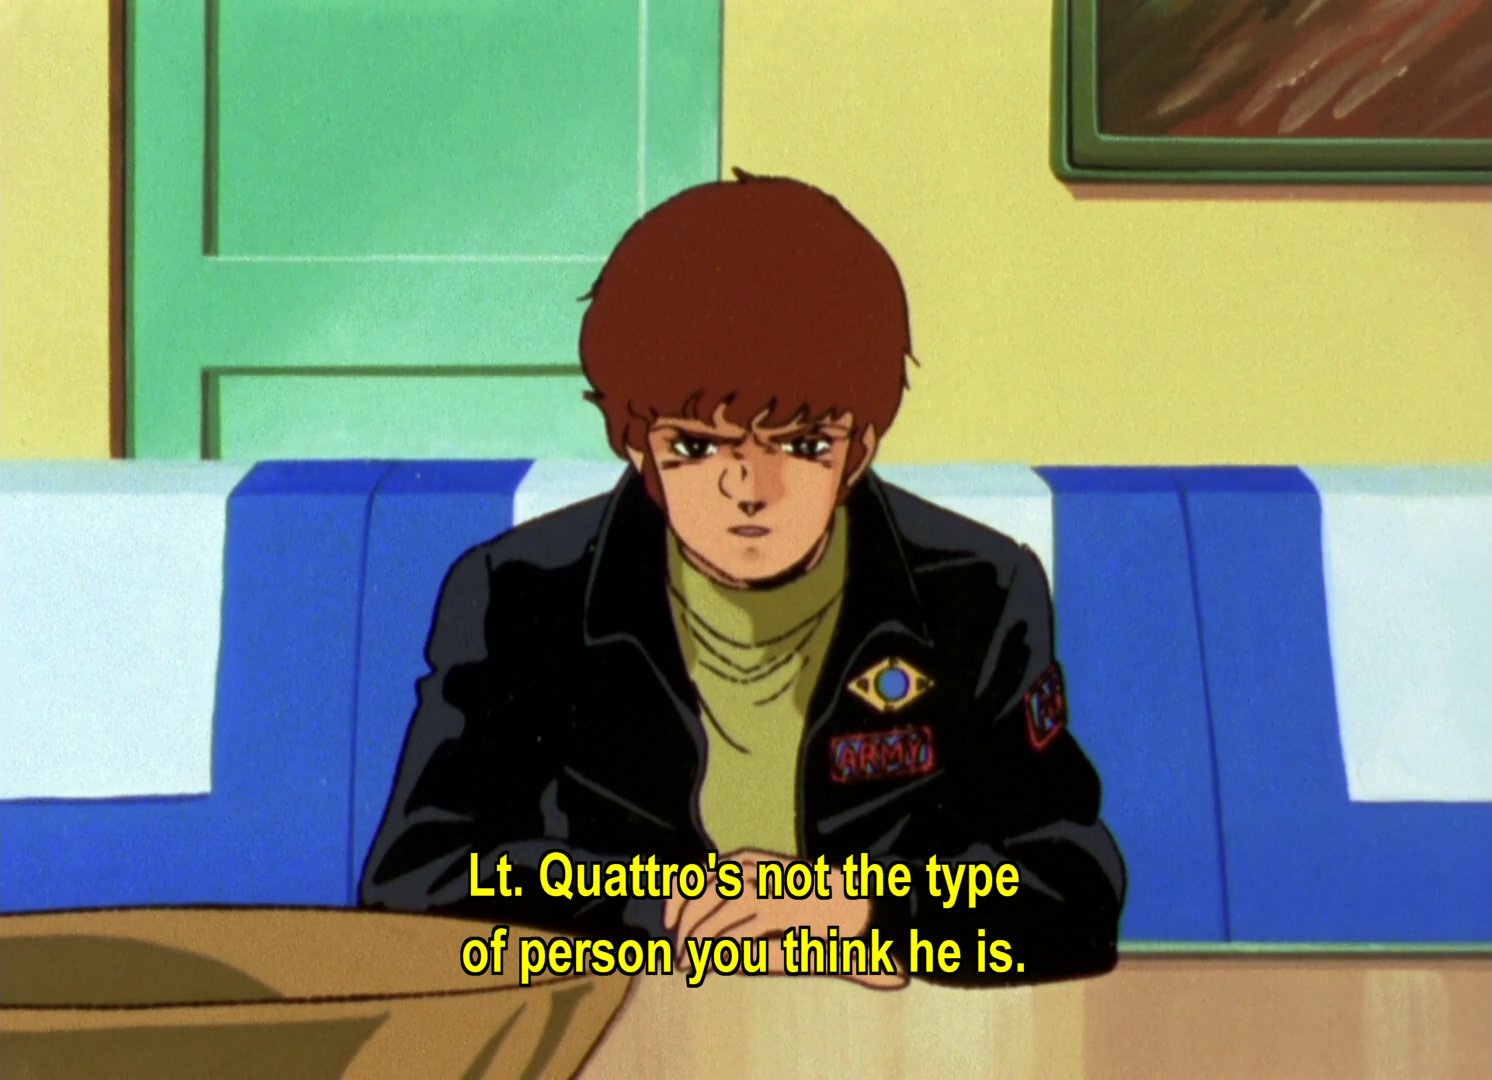 Amuro, angry at a table: Lt Quattro's not the type of person you think he is.